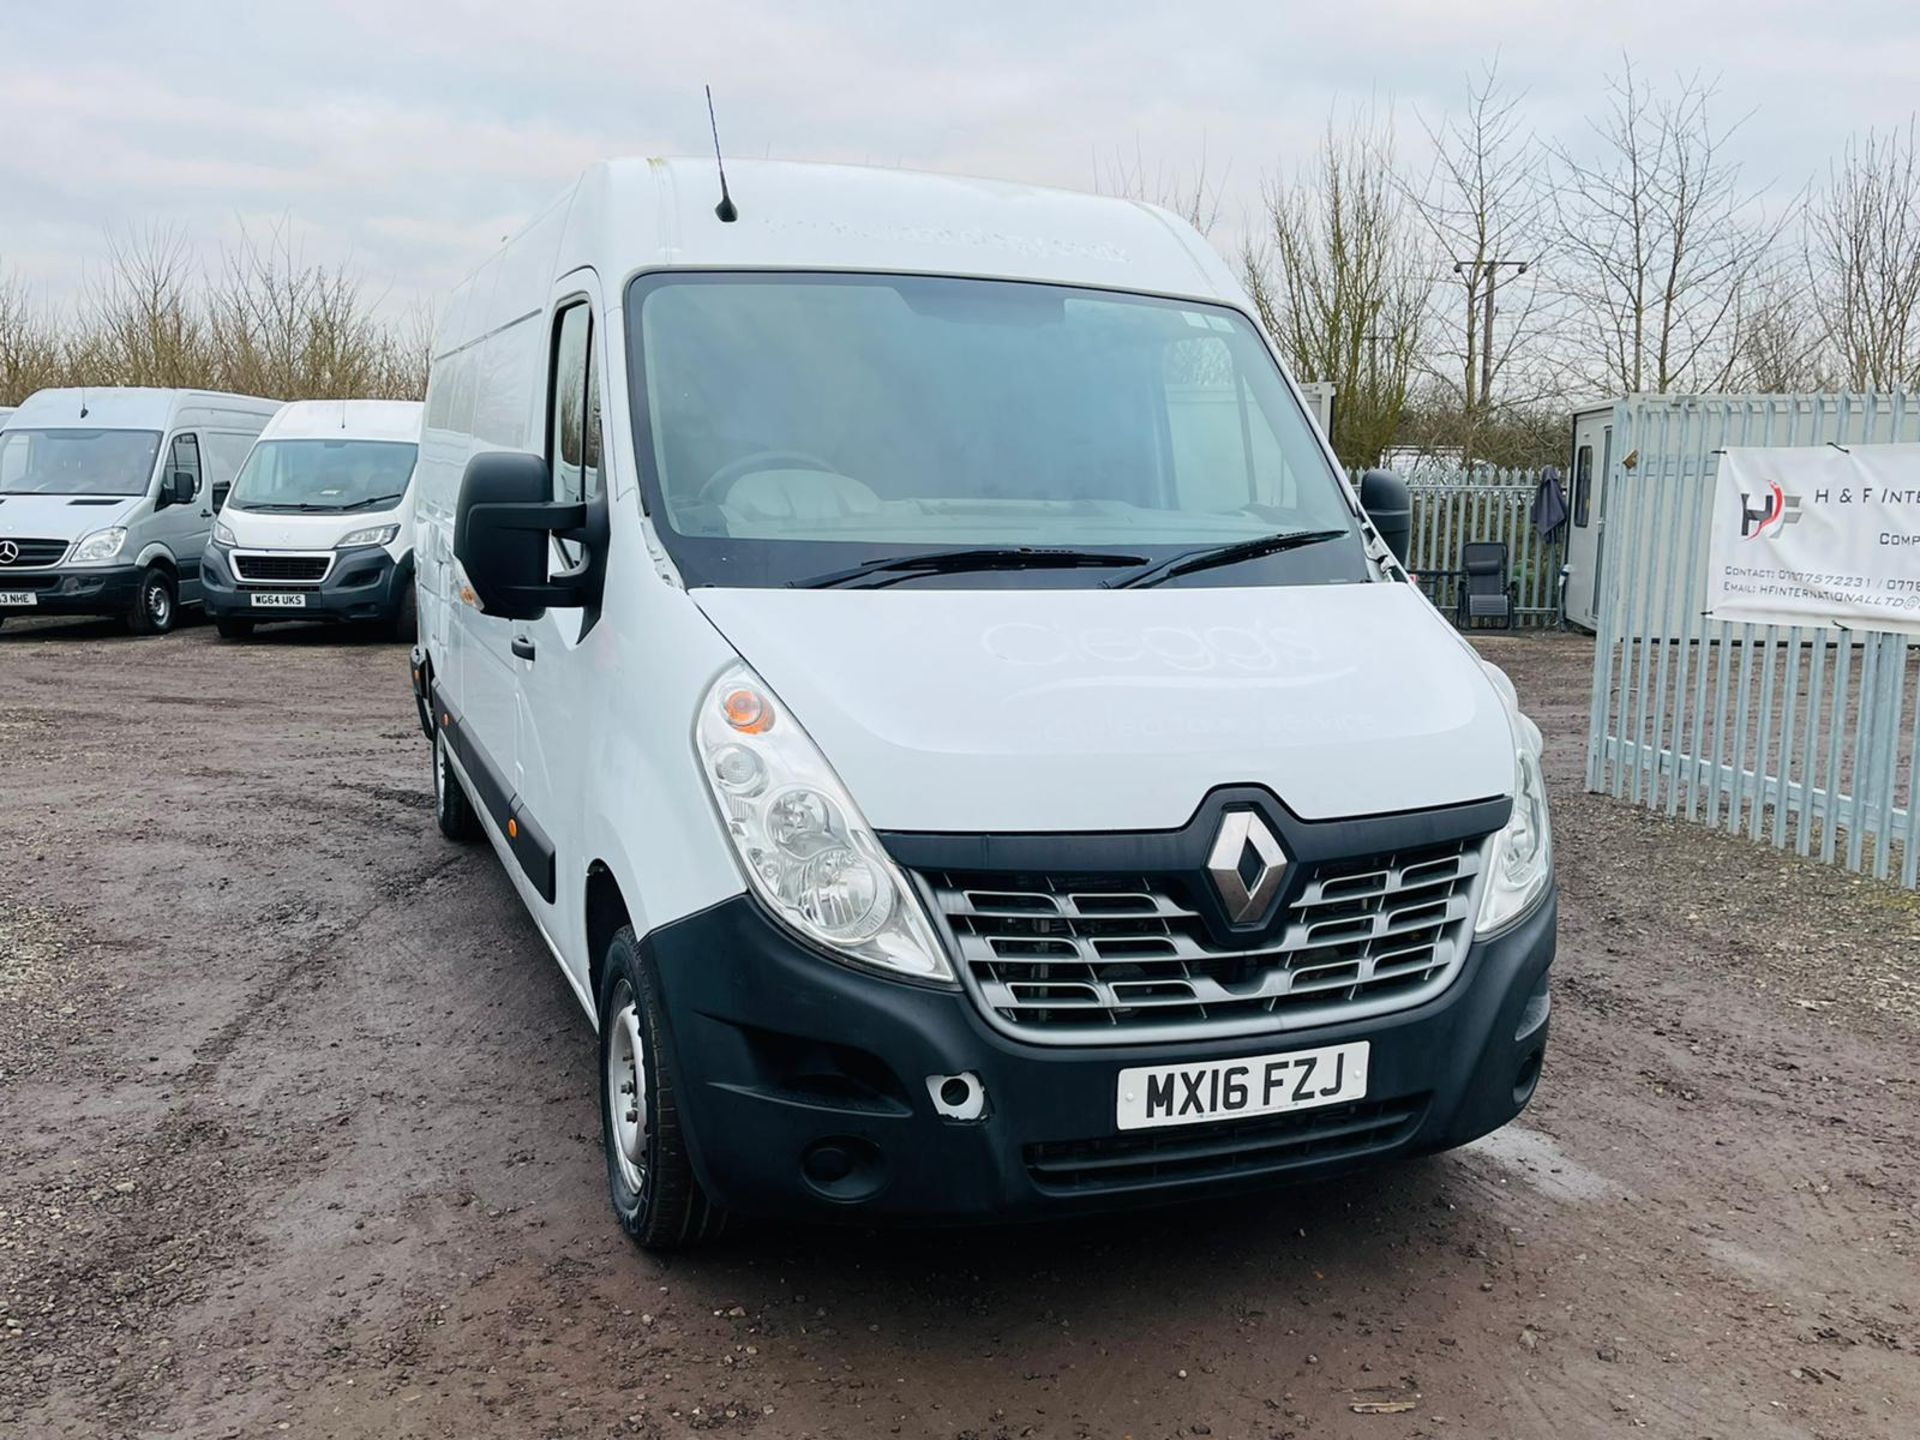 Renault Master 2.3 DCI 110 Business LM35 L3 H2 2016 '16 reg' Fridge/Freezer - Fully Insulated - Image 3 of 23